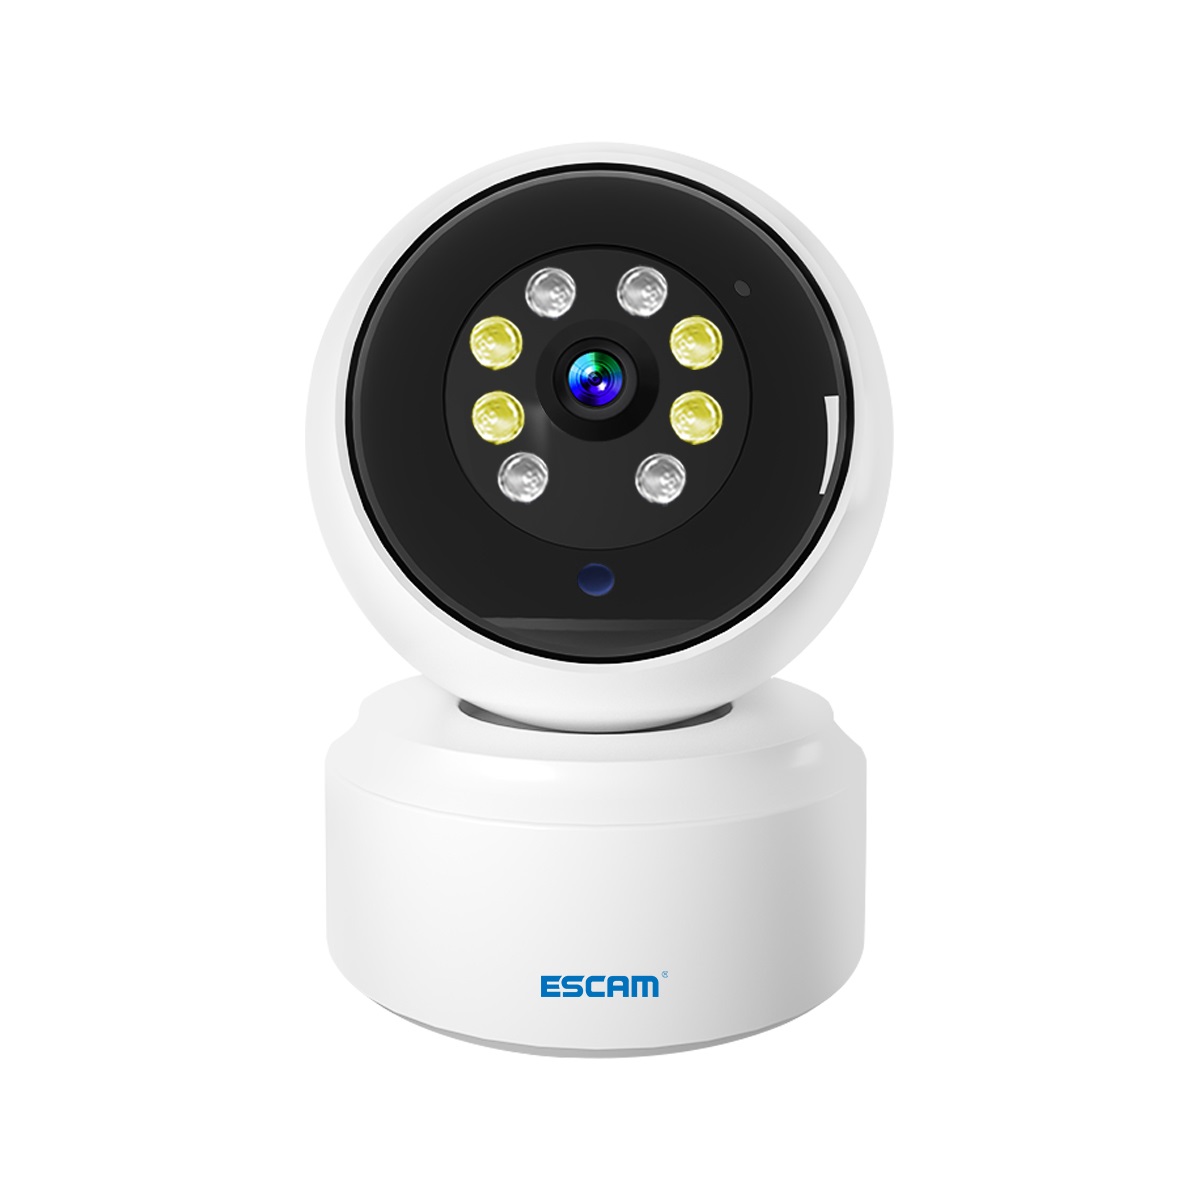 ESCAM-PT200-2MP-1080P-5G-Dome-WIFI-IP-Camera-Mobile-Tracking-Coud-Storage-Bidirectional-Voice-Night--1948164-10